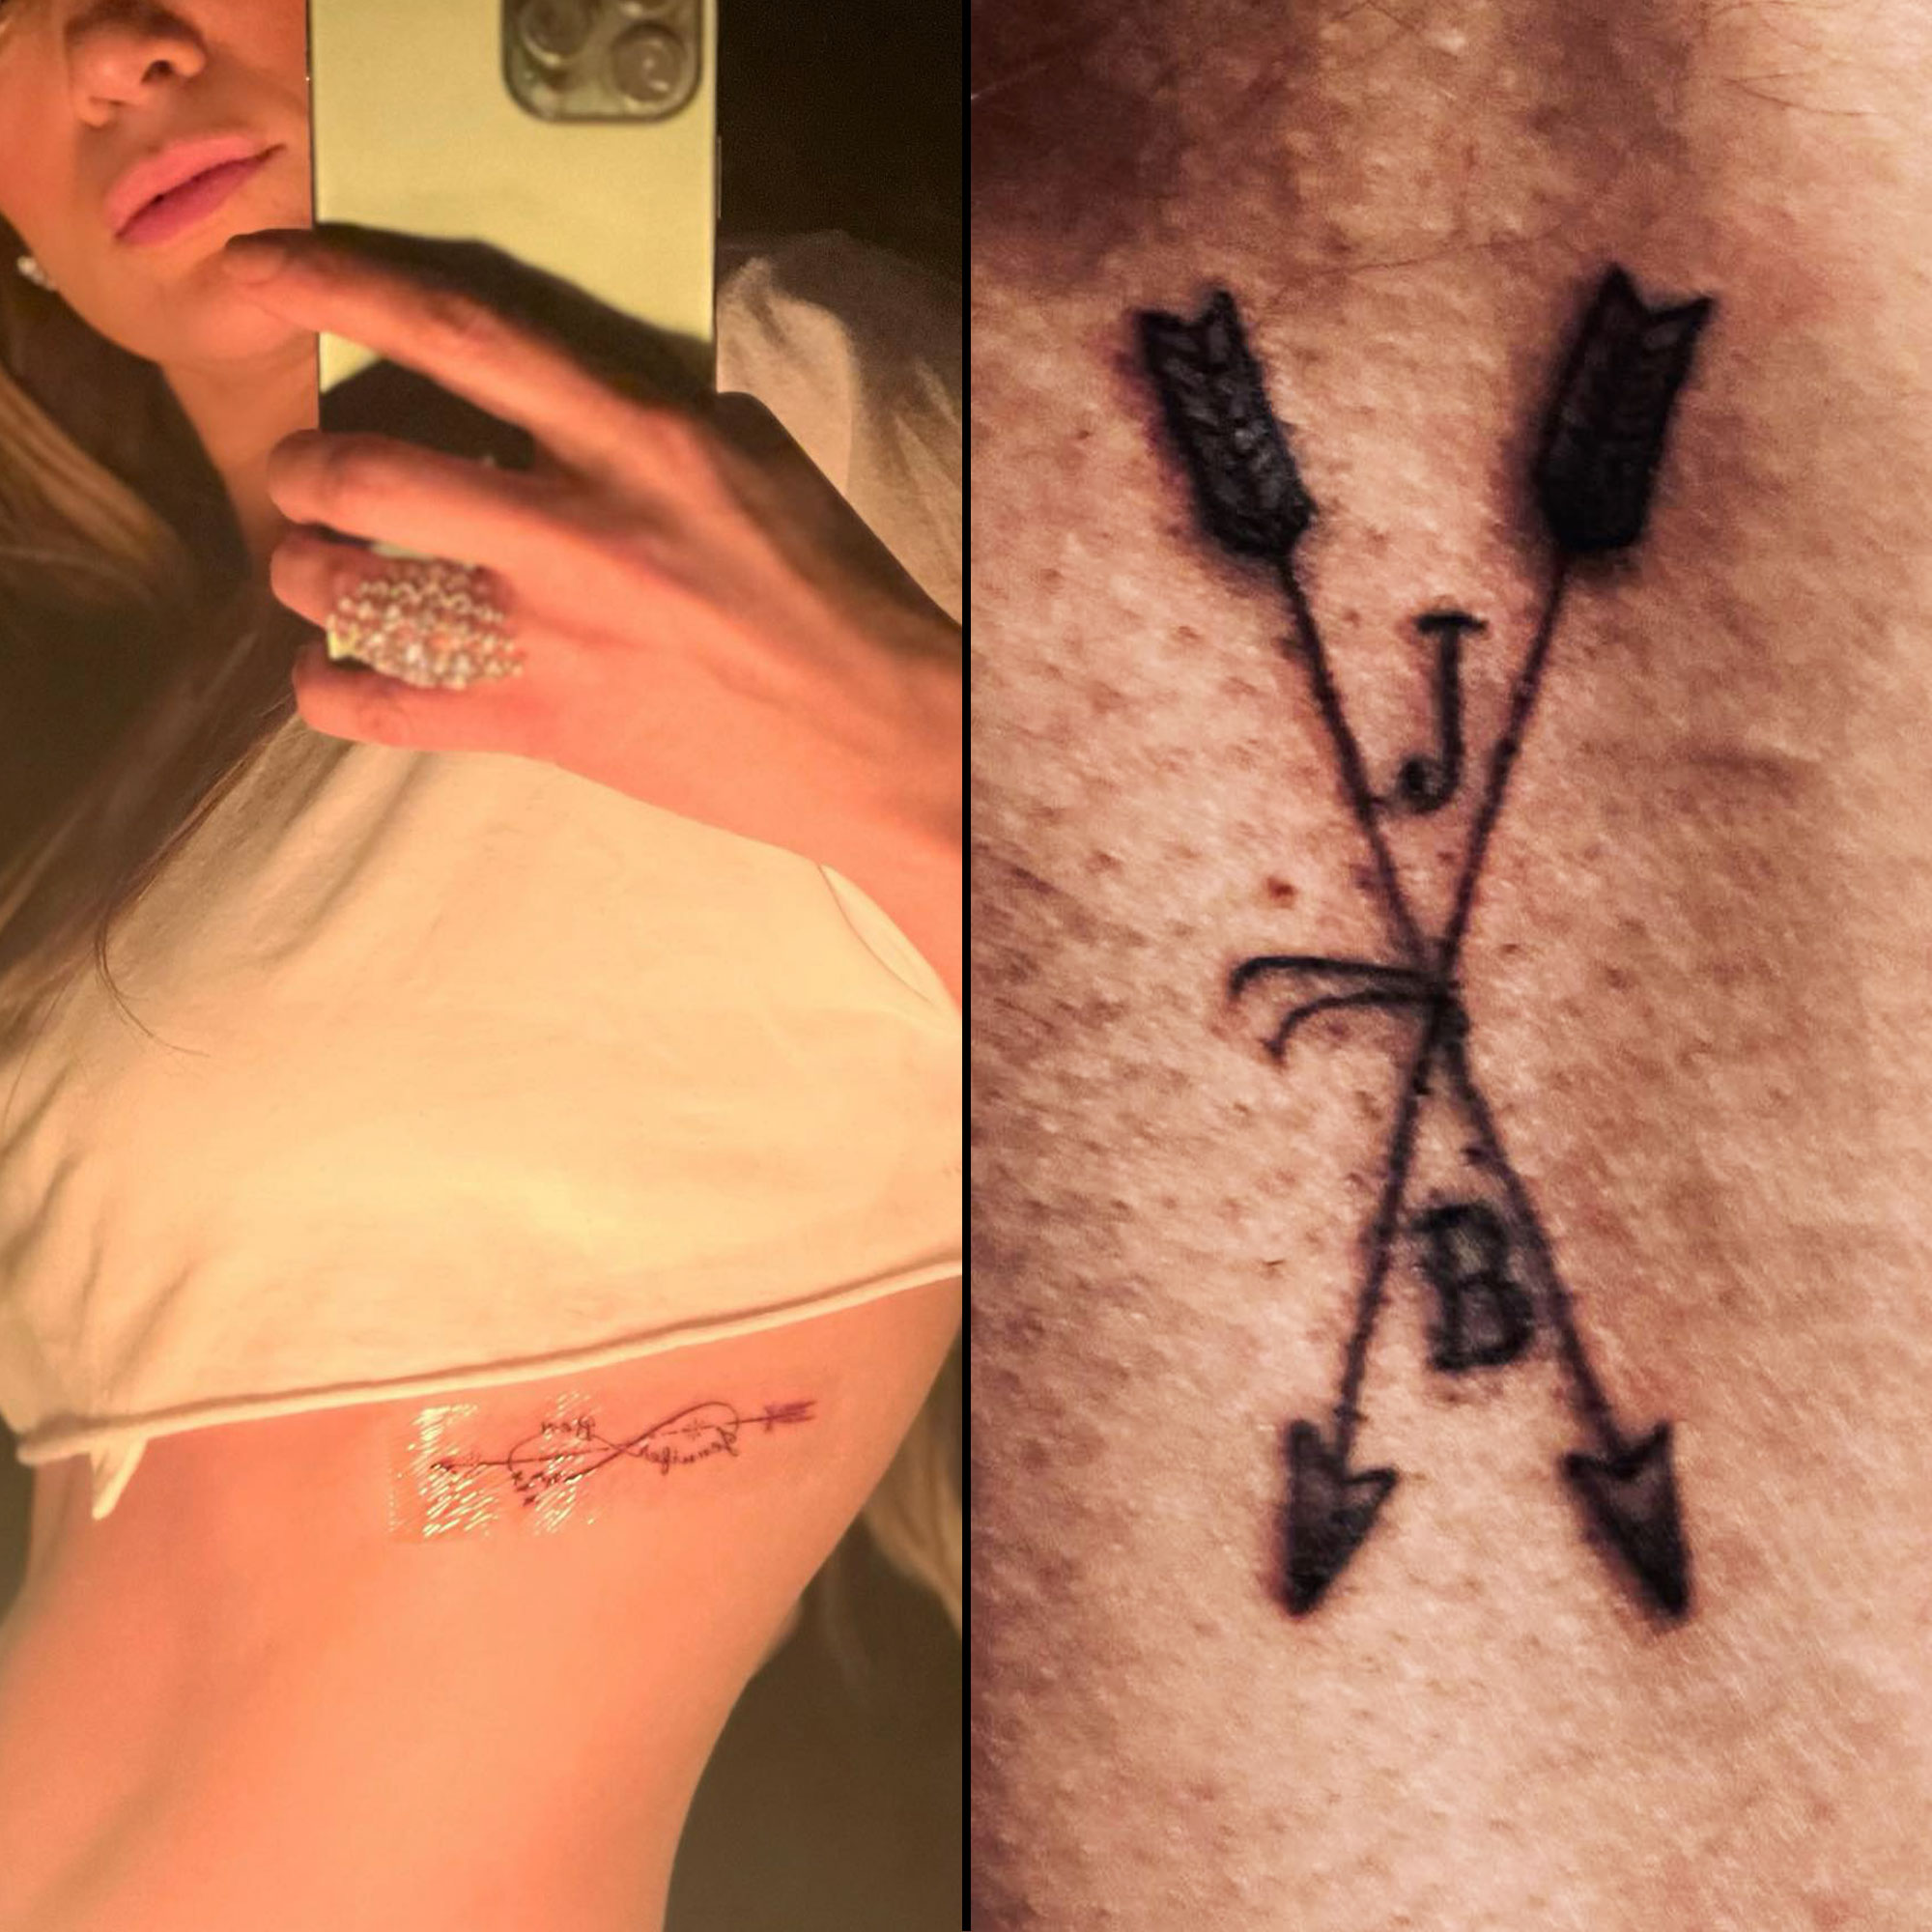 Woman tattoos Dallas Cowboys 2023 championship on her chest